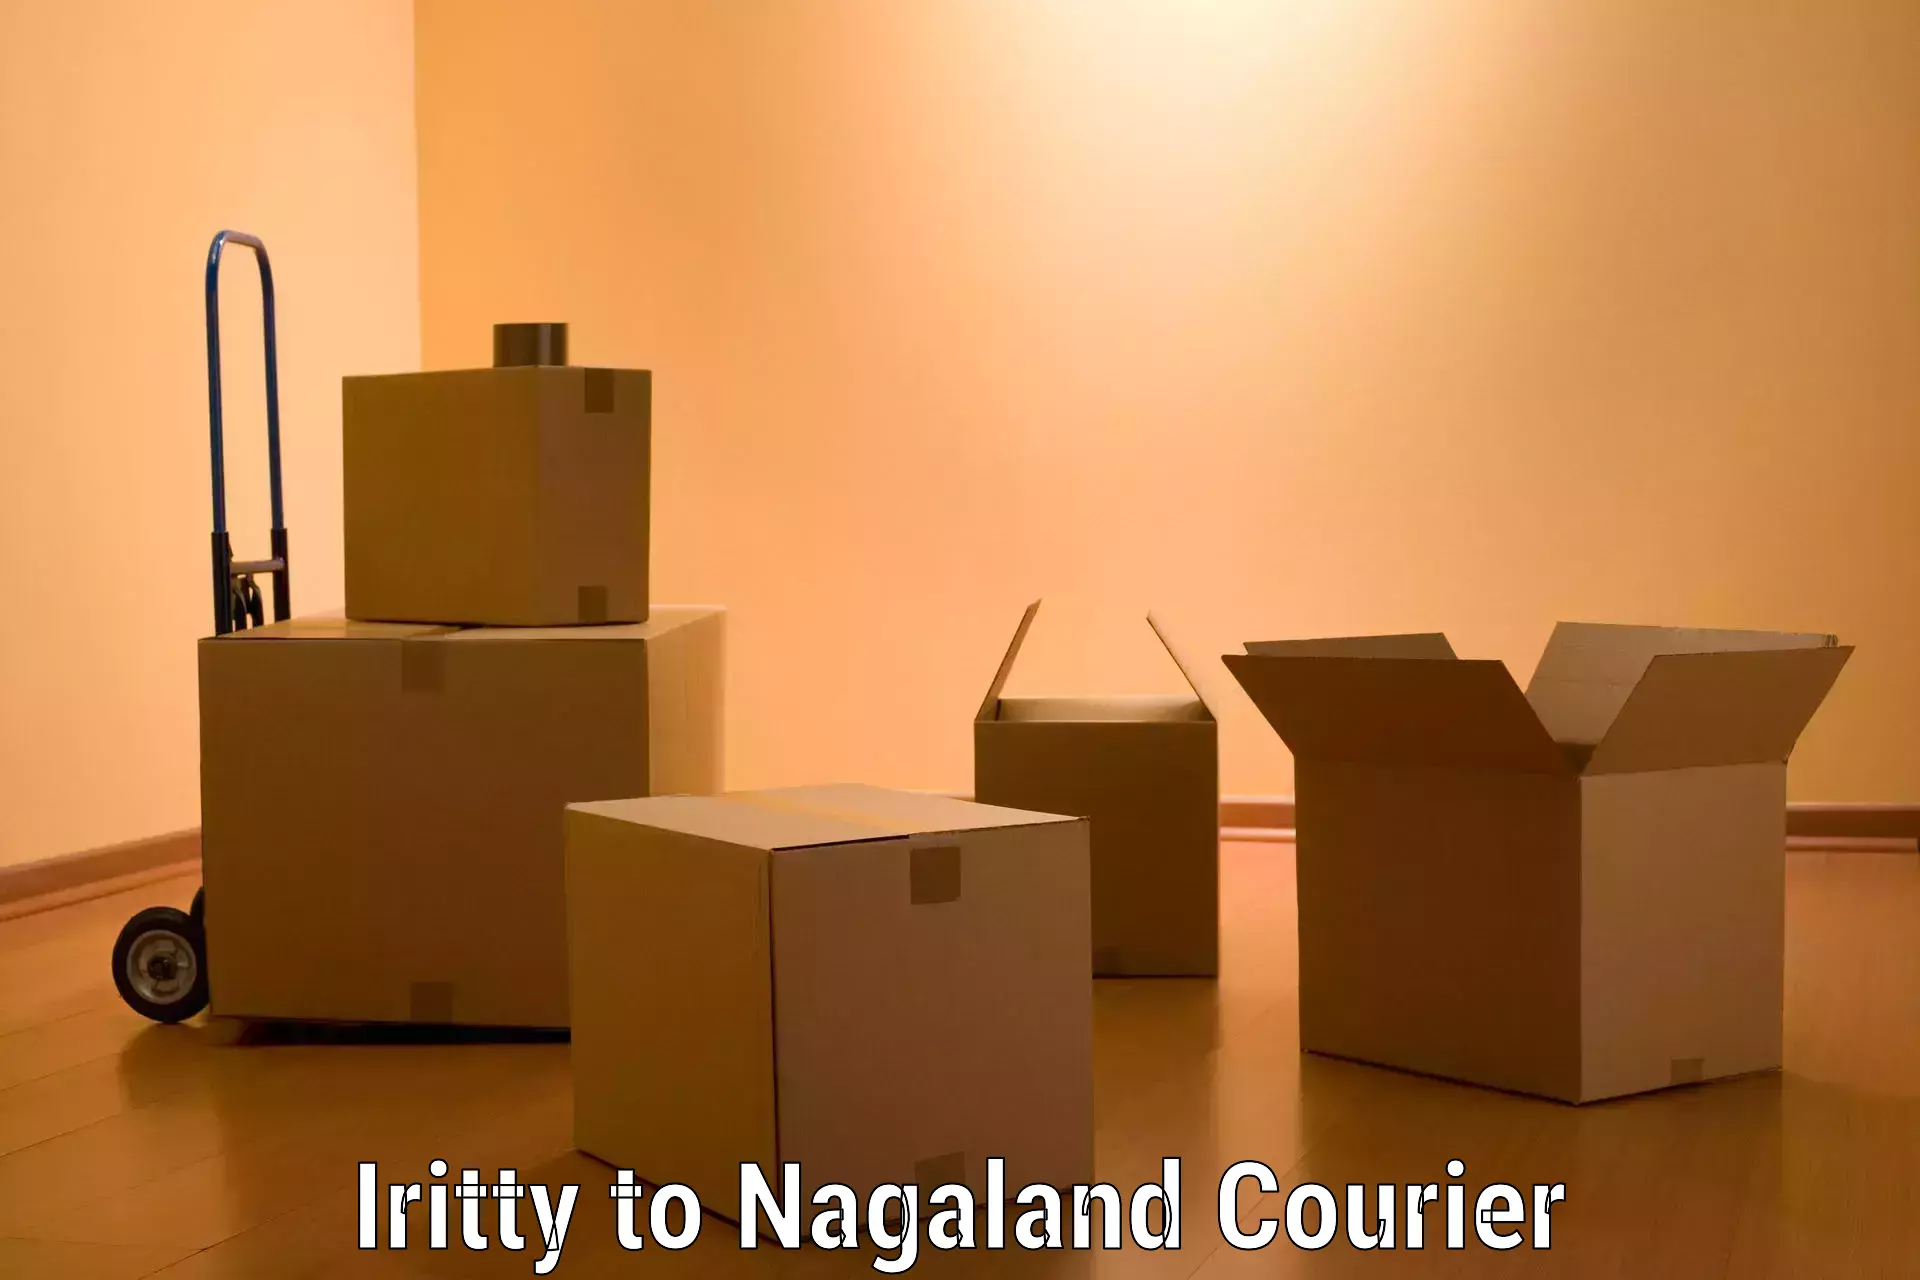 Professional furniture movers Iritty to Nagaland